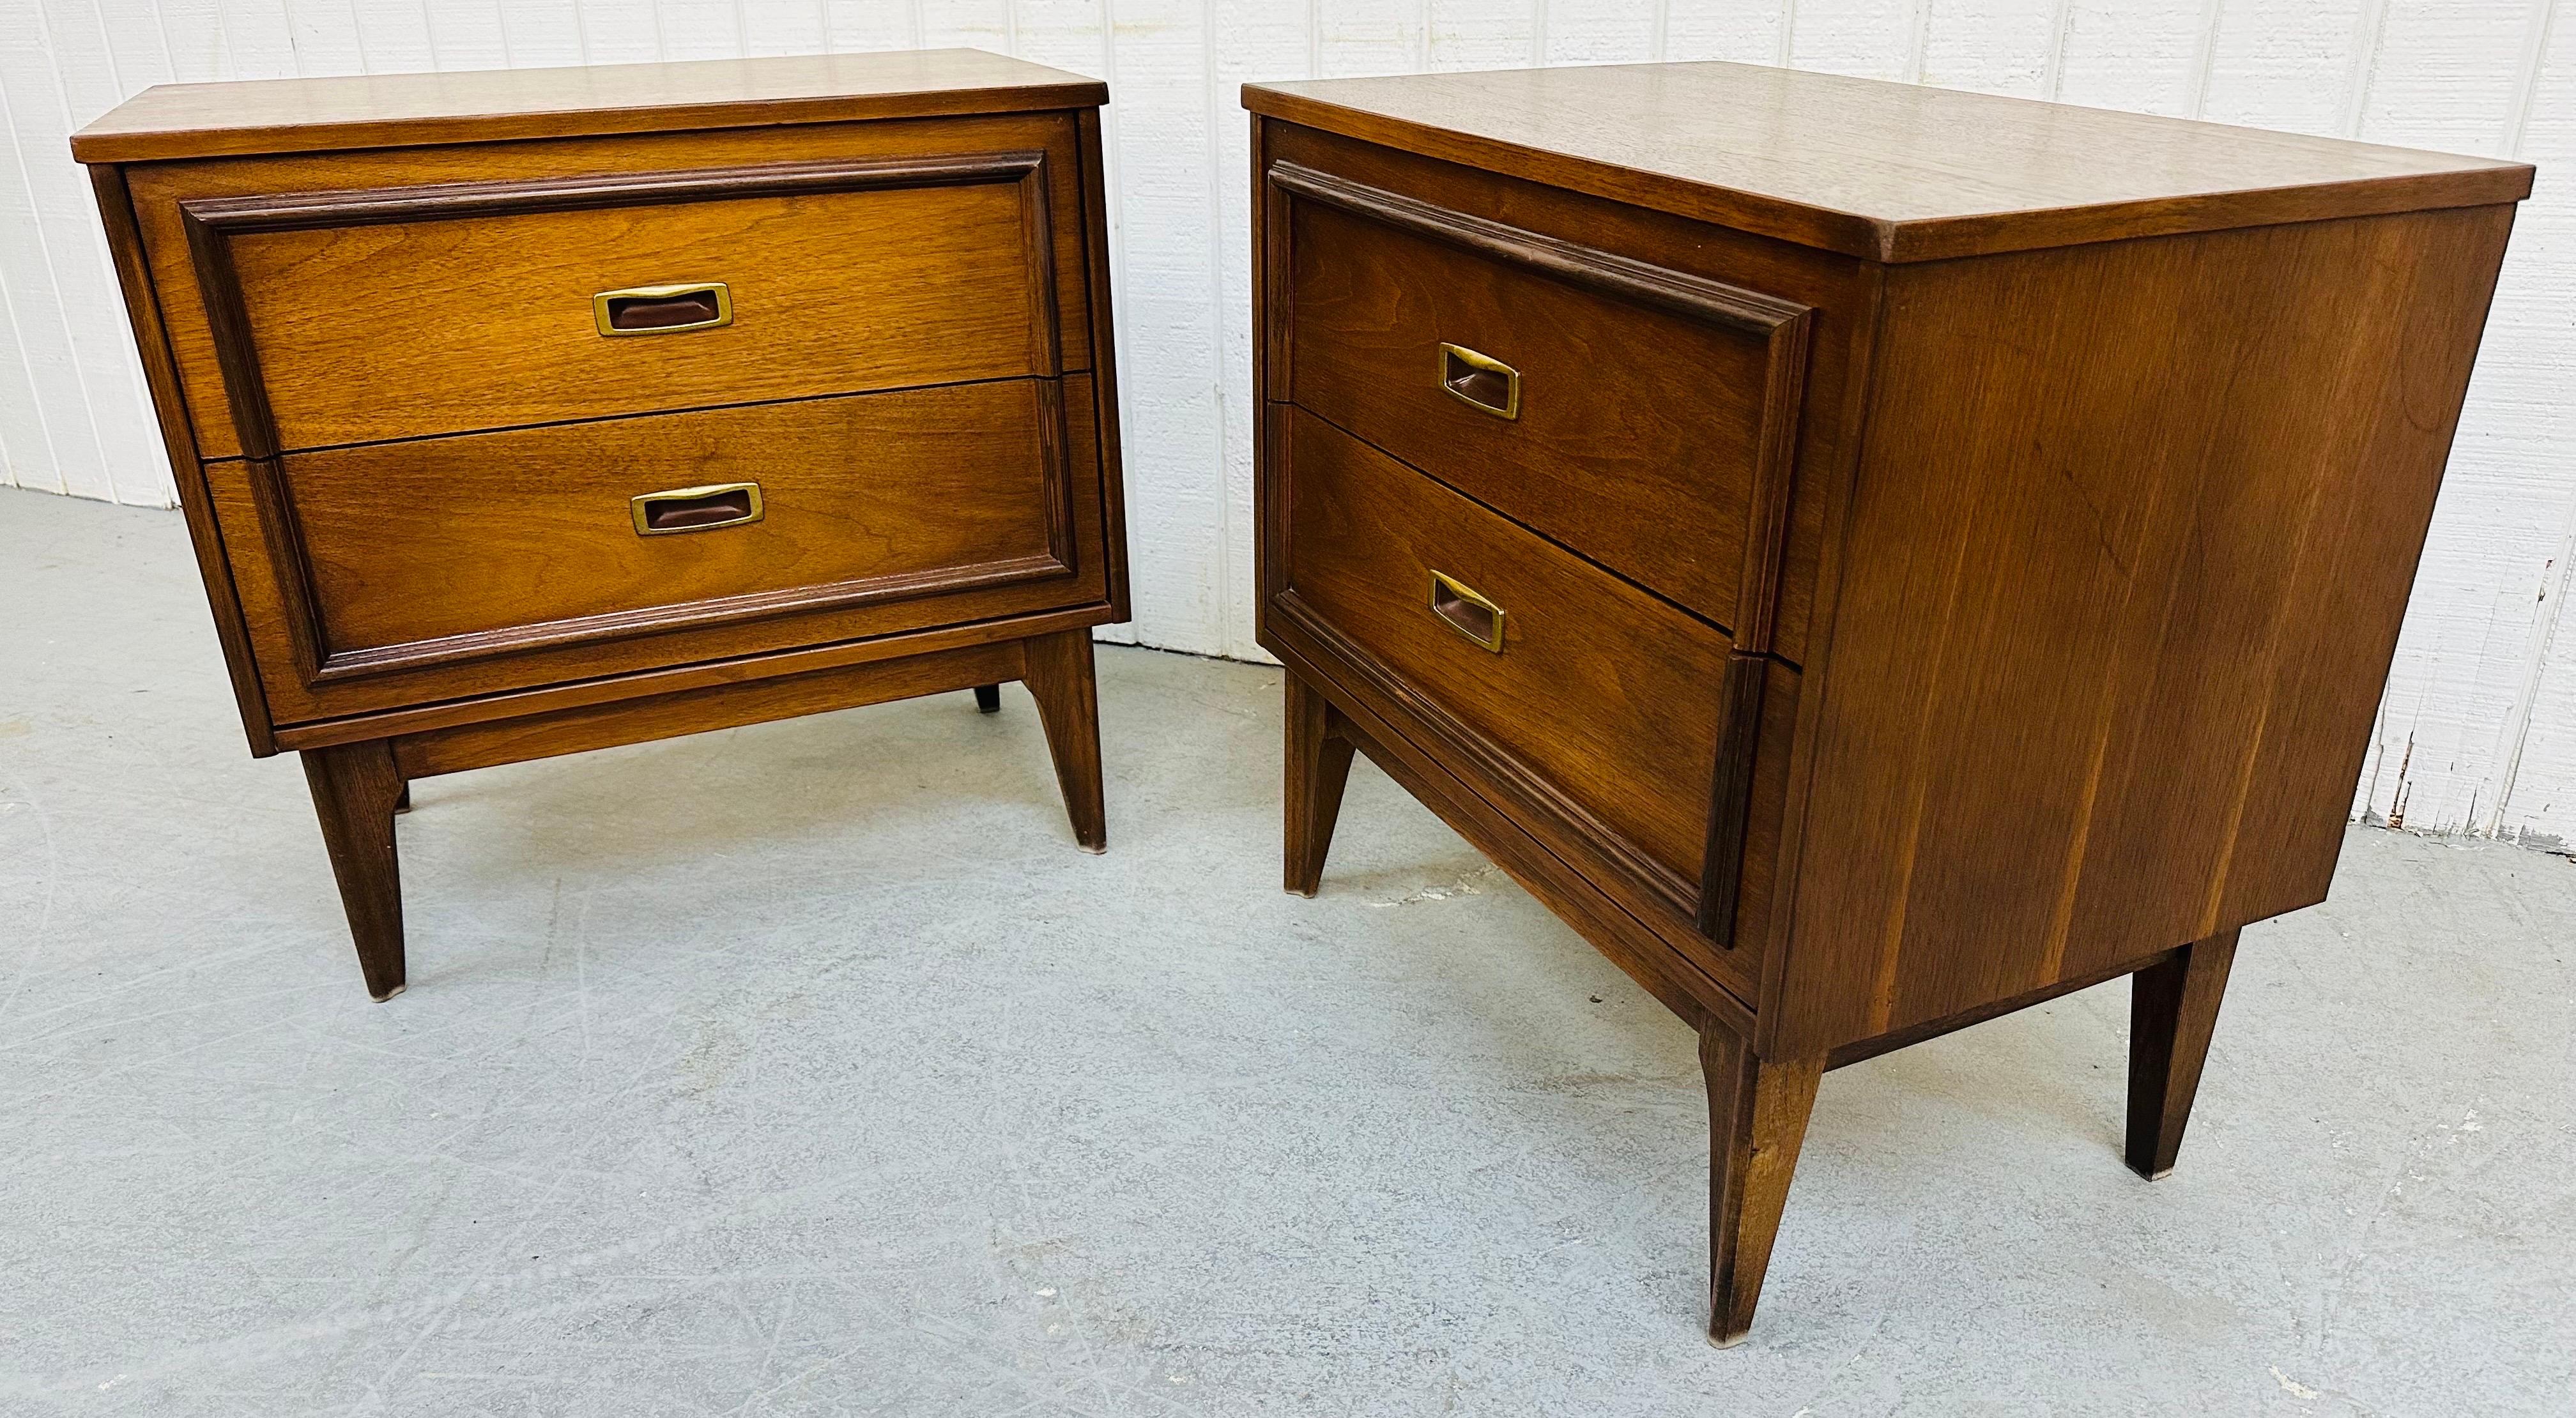 This listing is for a pair of Mid-Century Modern Walnut Nightstands. Featuring a straight line design, two drawers for storage, original hardware, and a beautiful walnut finish.